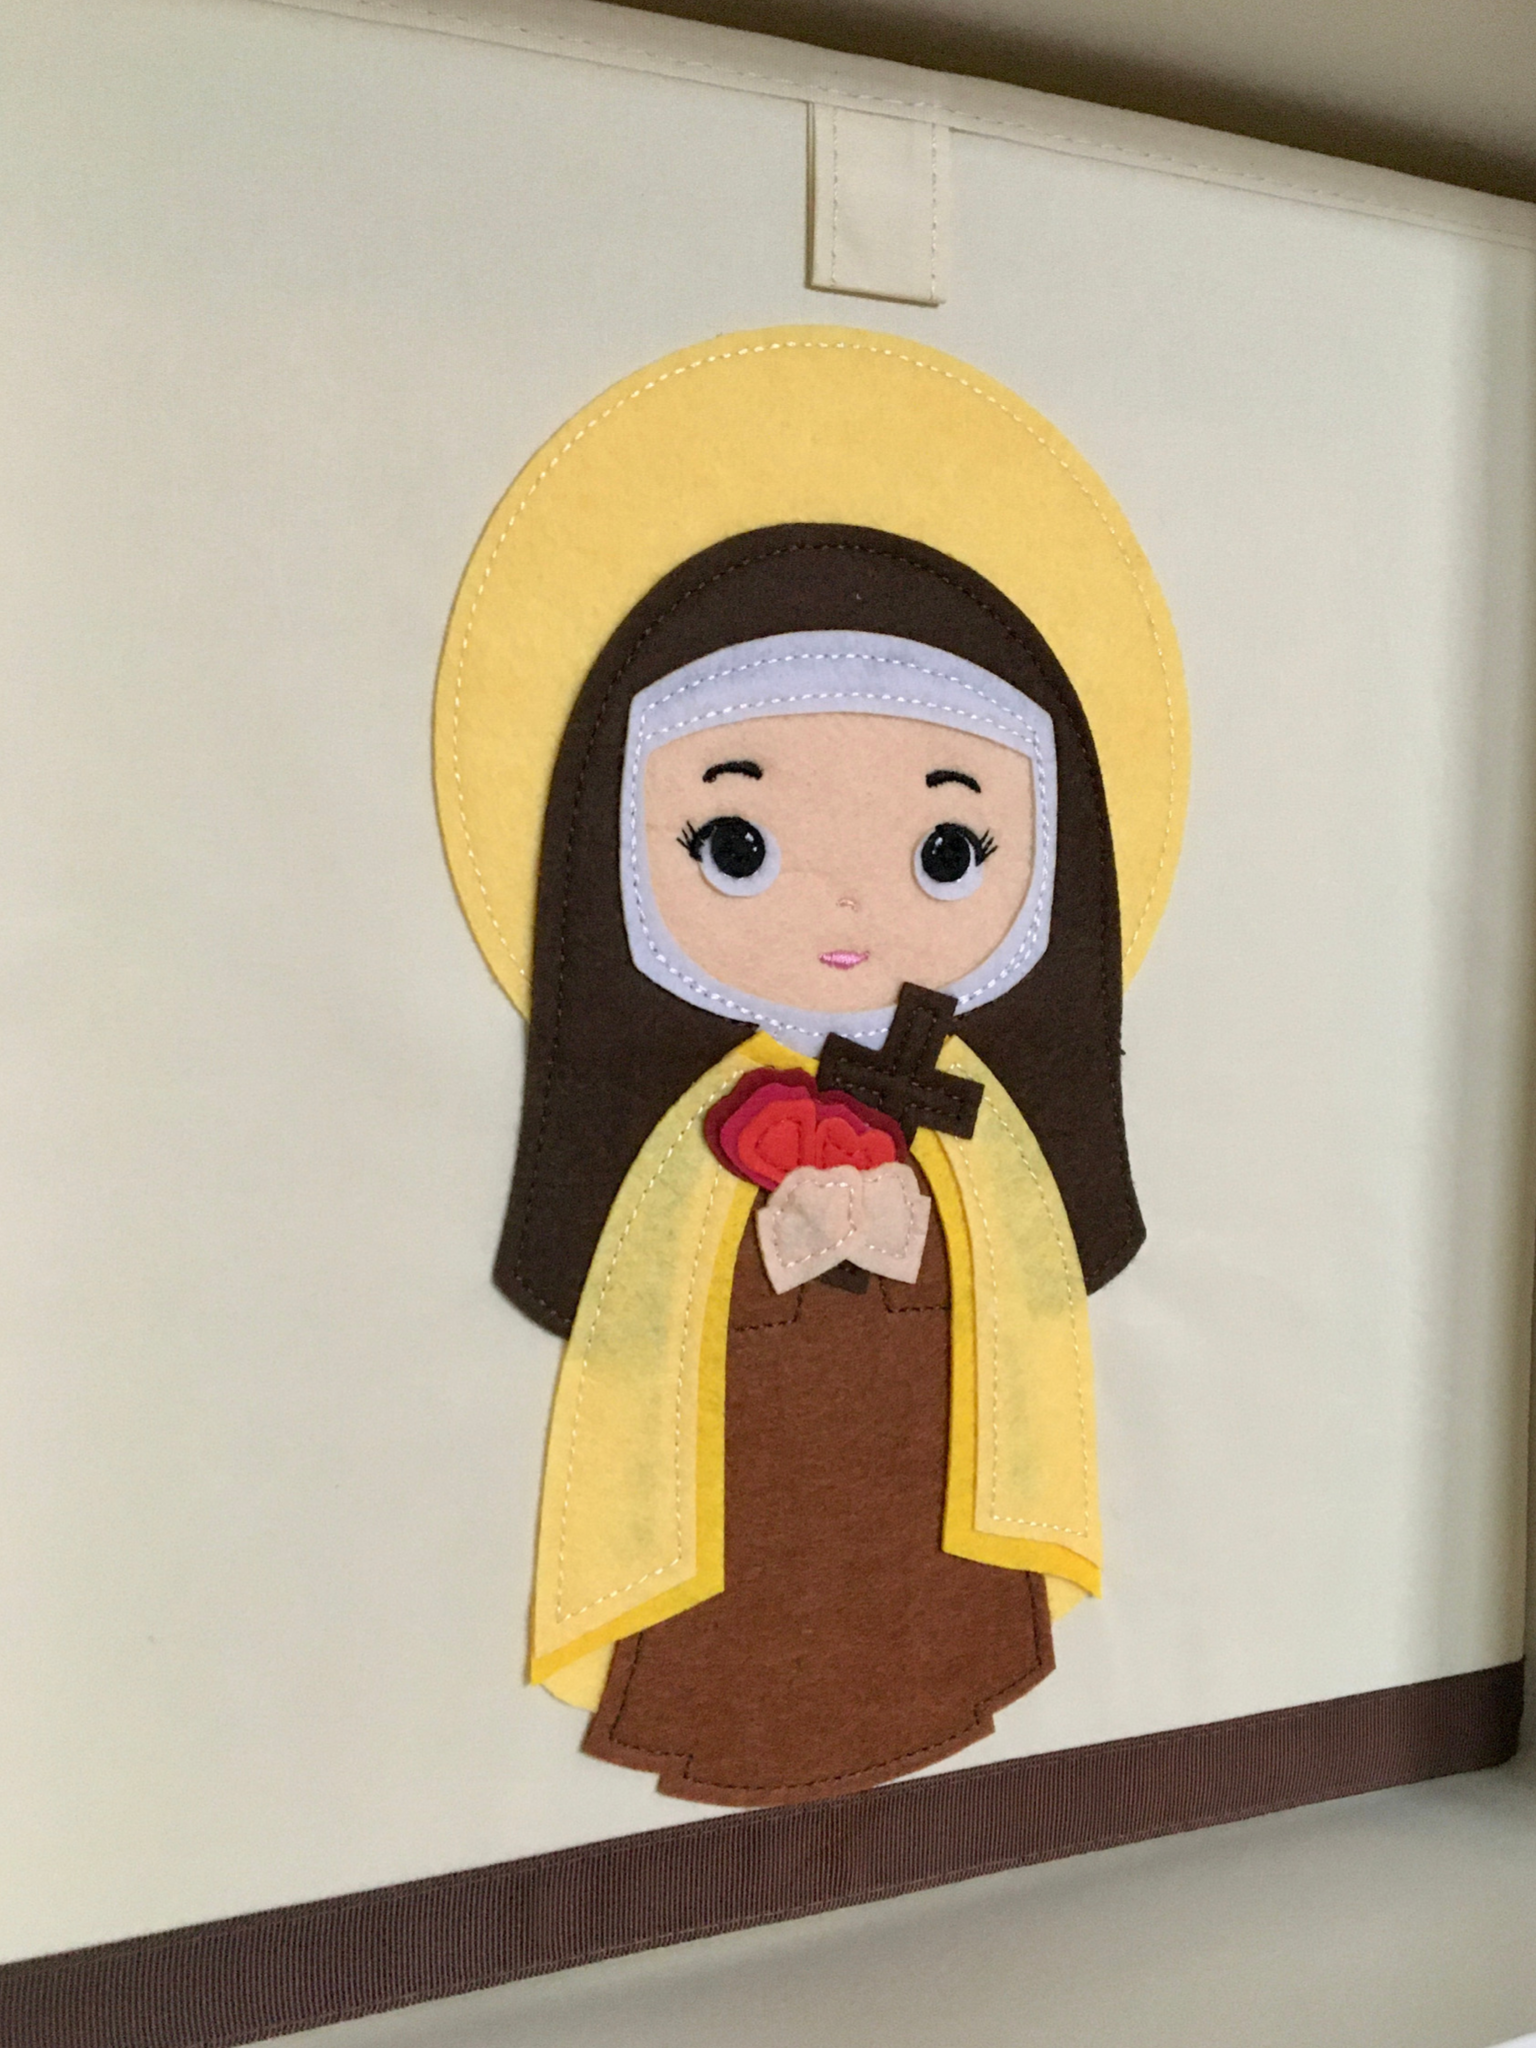 St. Therese of Lisieux storage bin